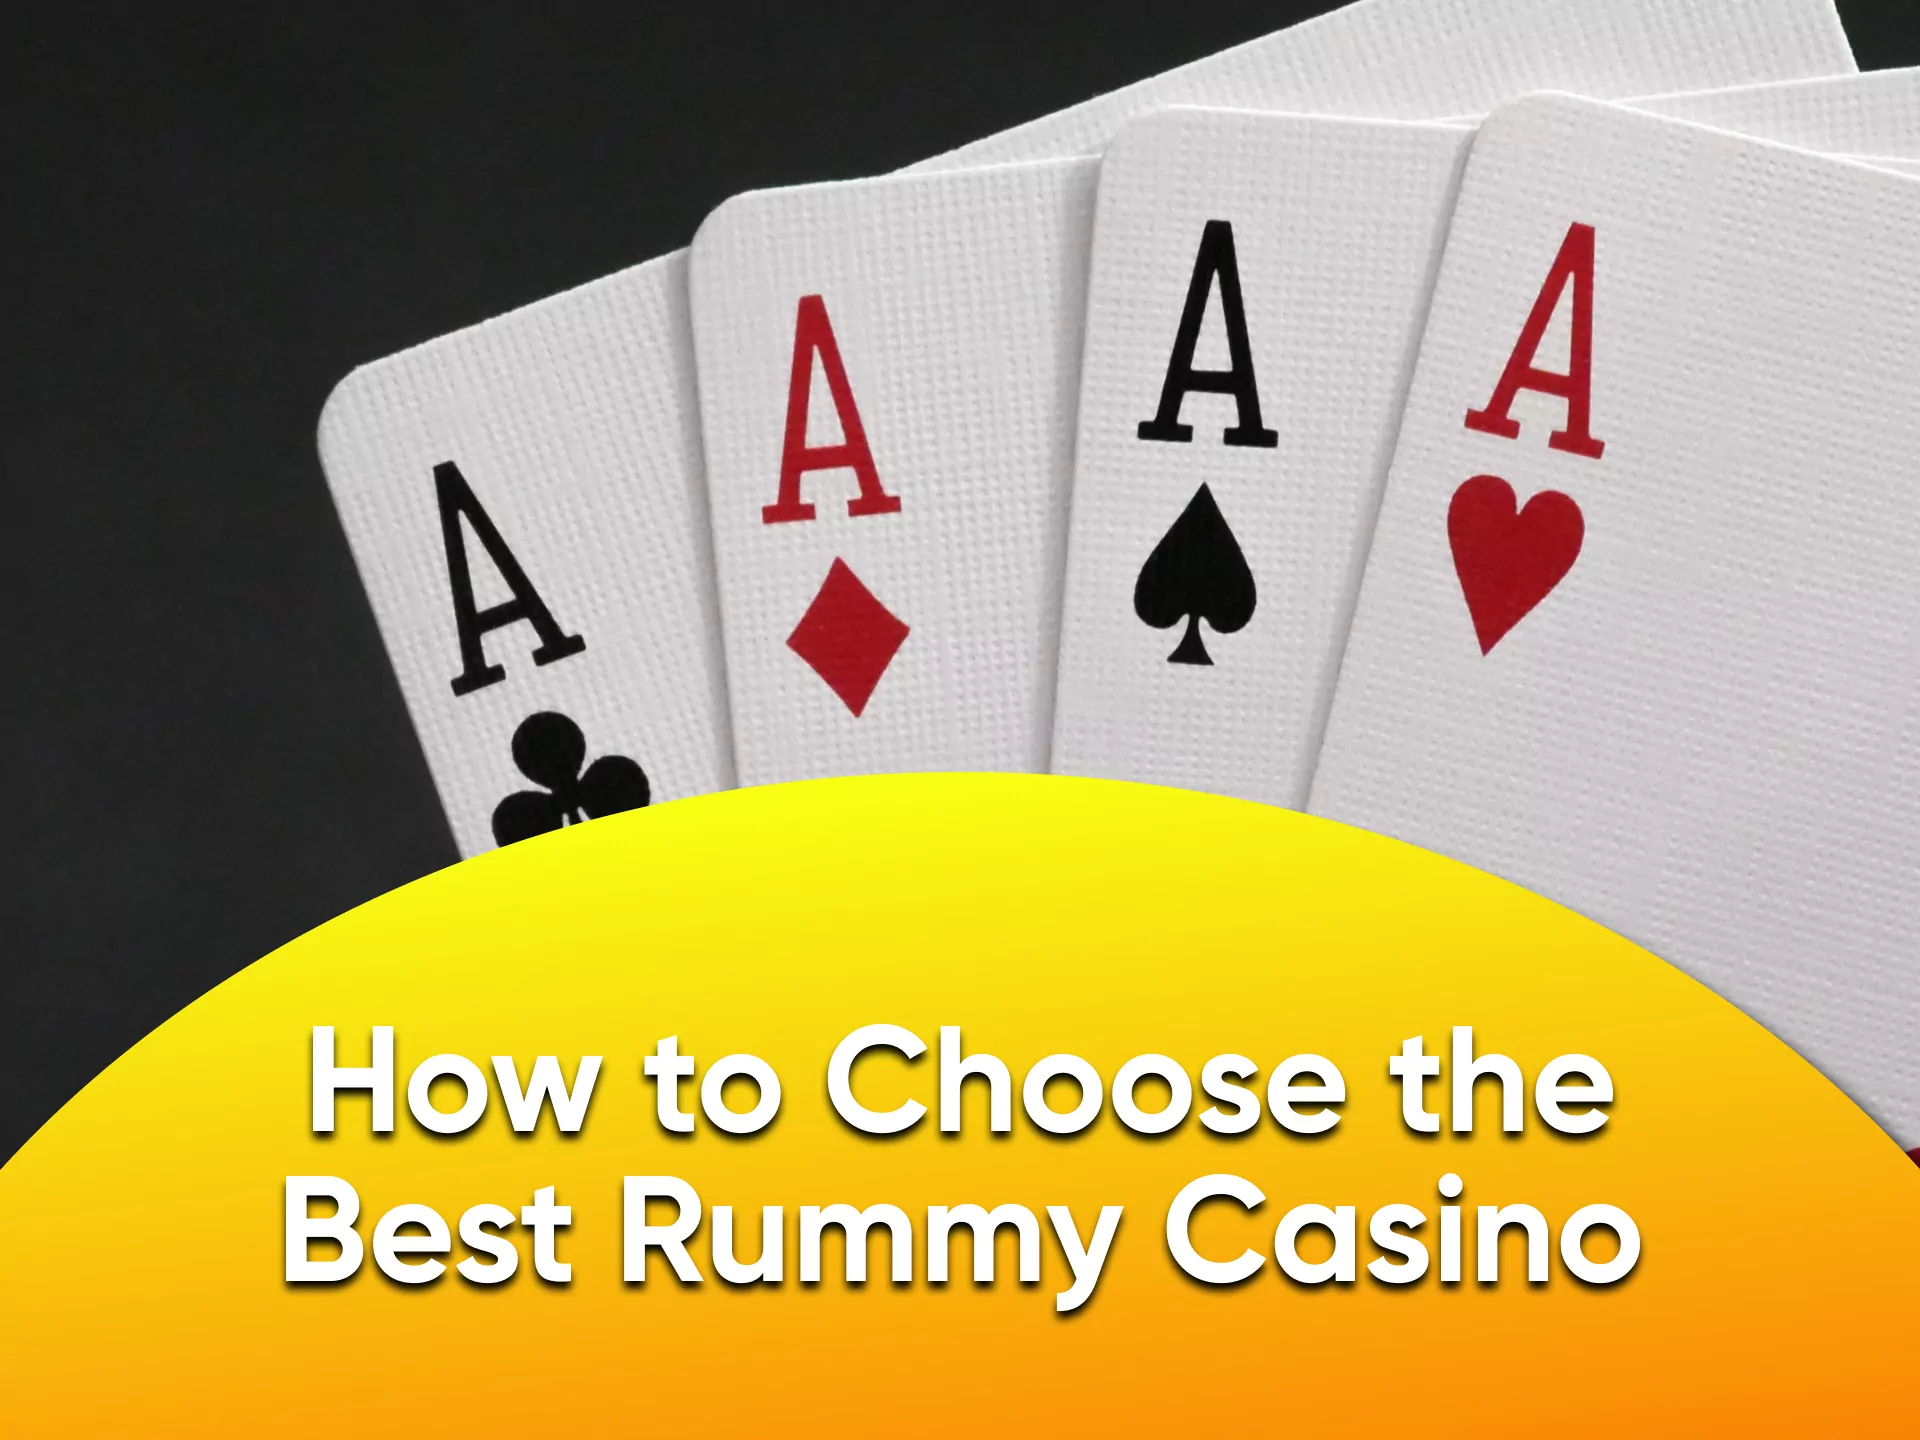 Choose a trusted service to play Rummy.